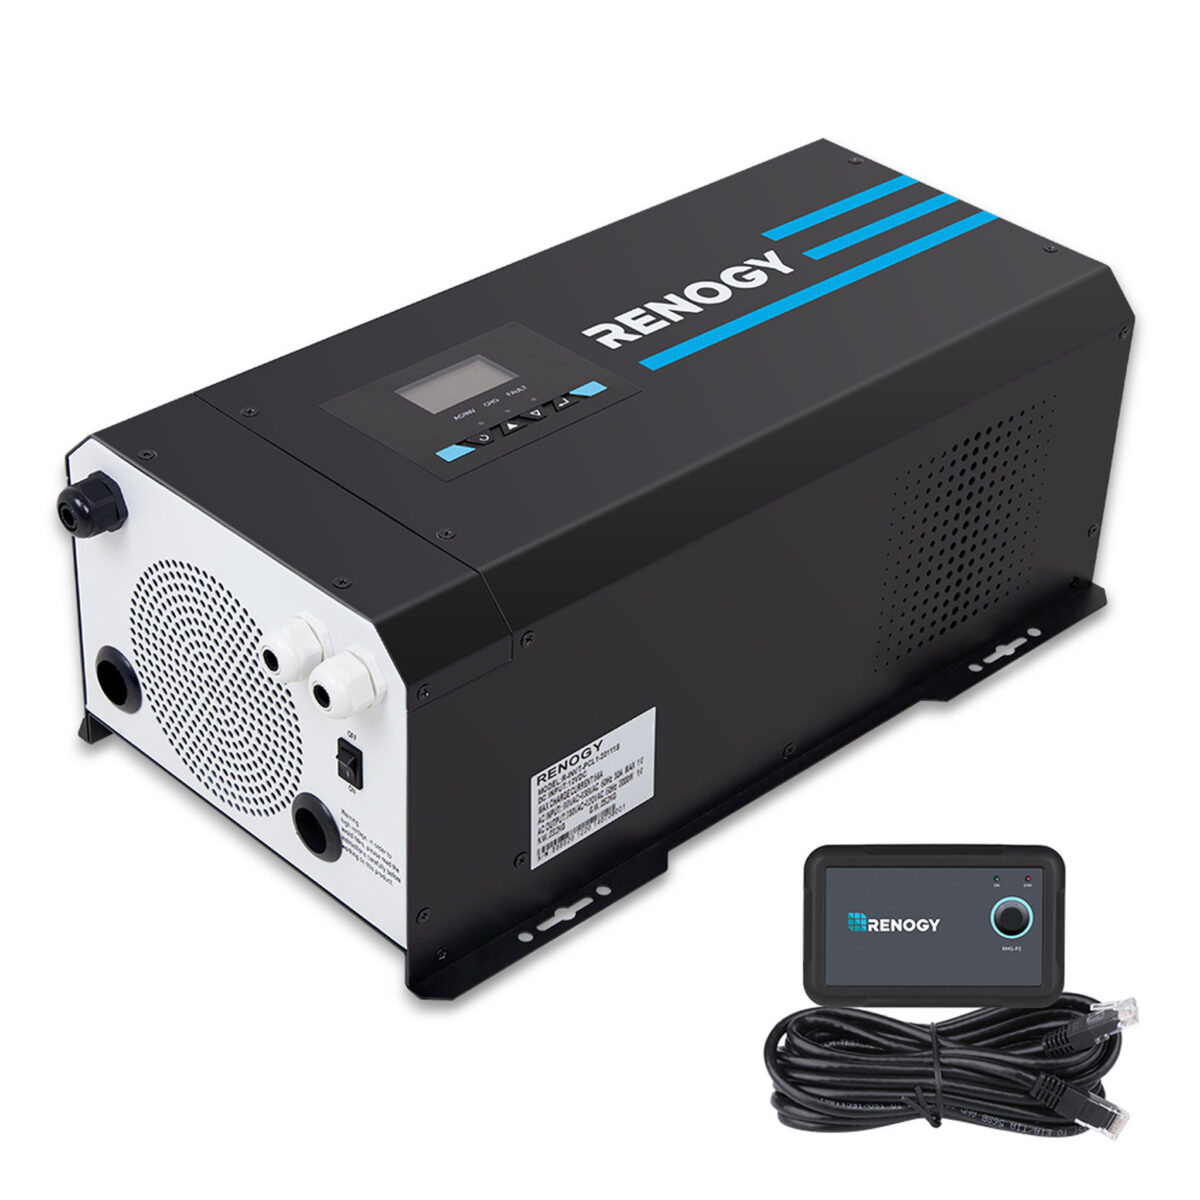 Renogy 2000w 12v Pure Sine Wave Inverter Charger With LCD